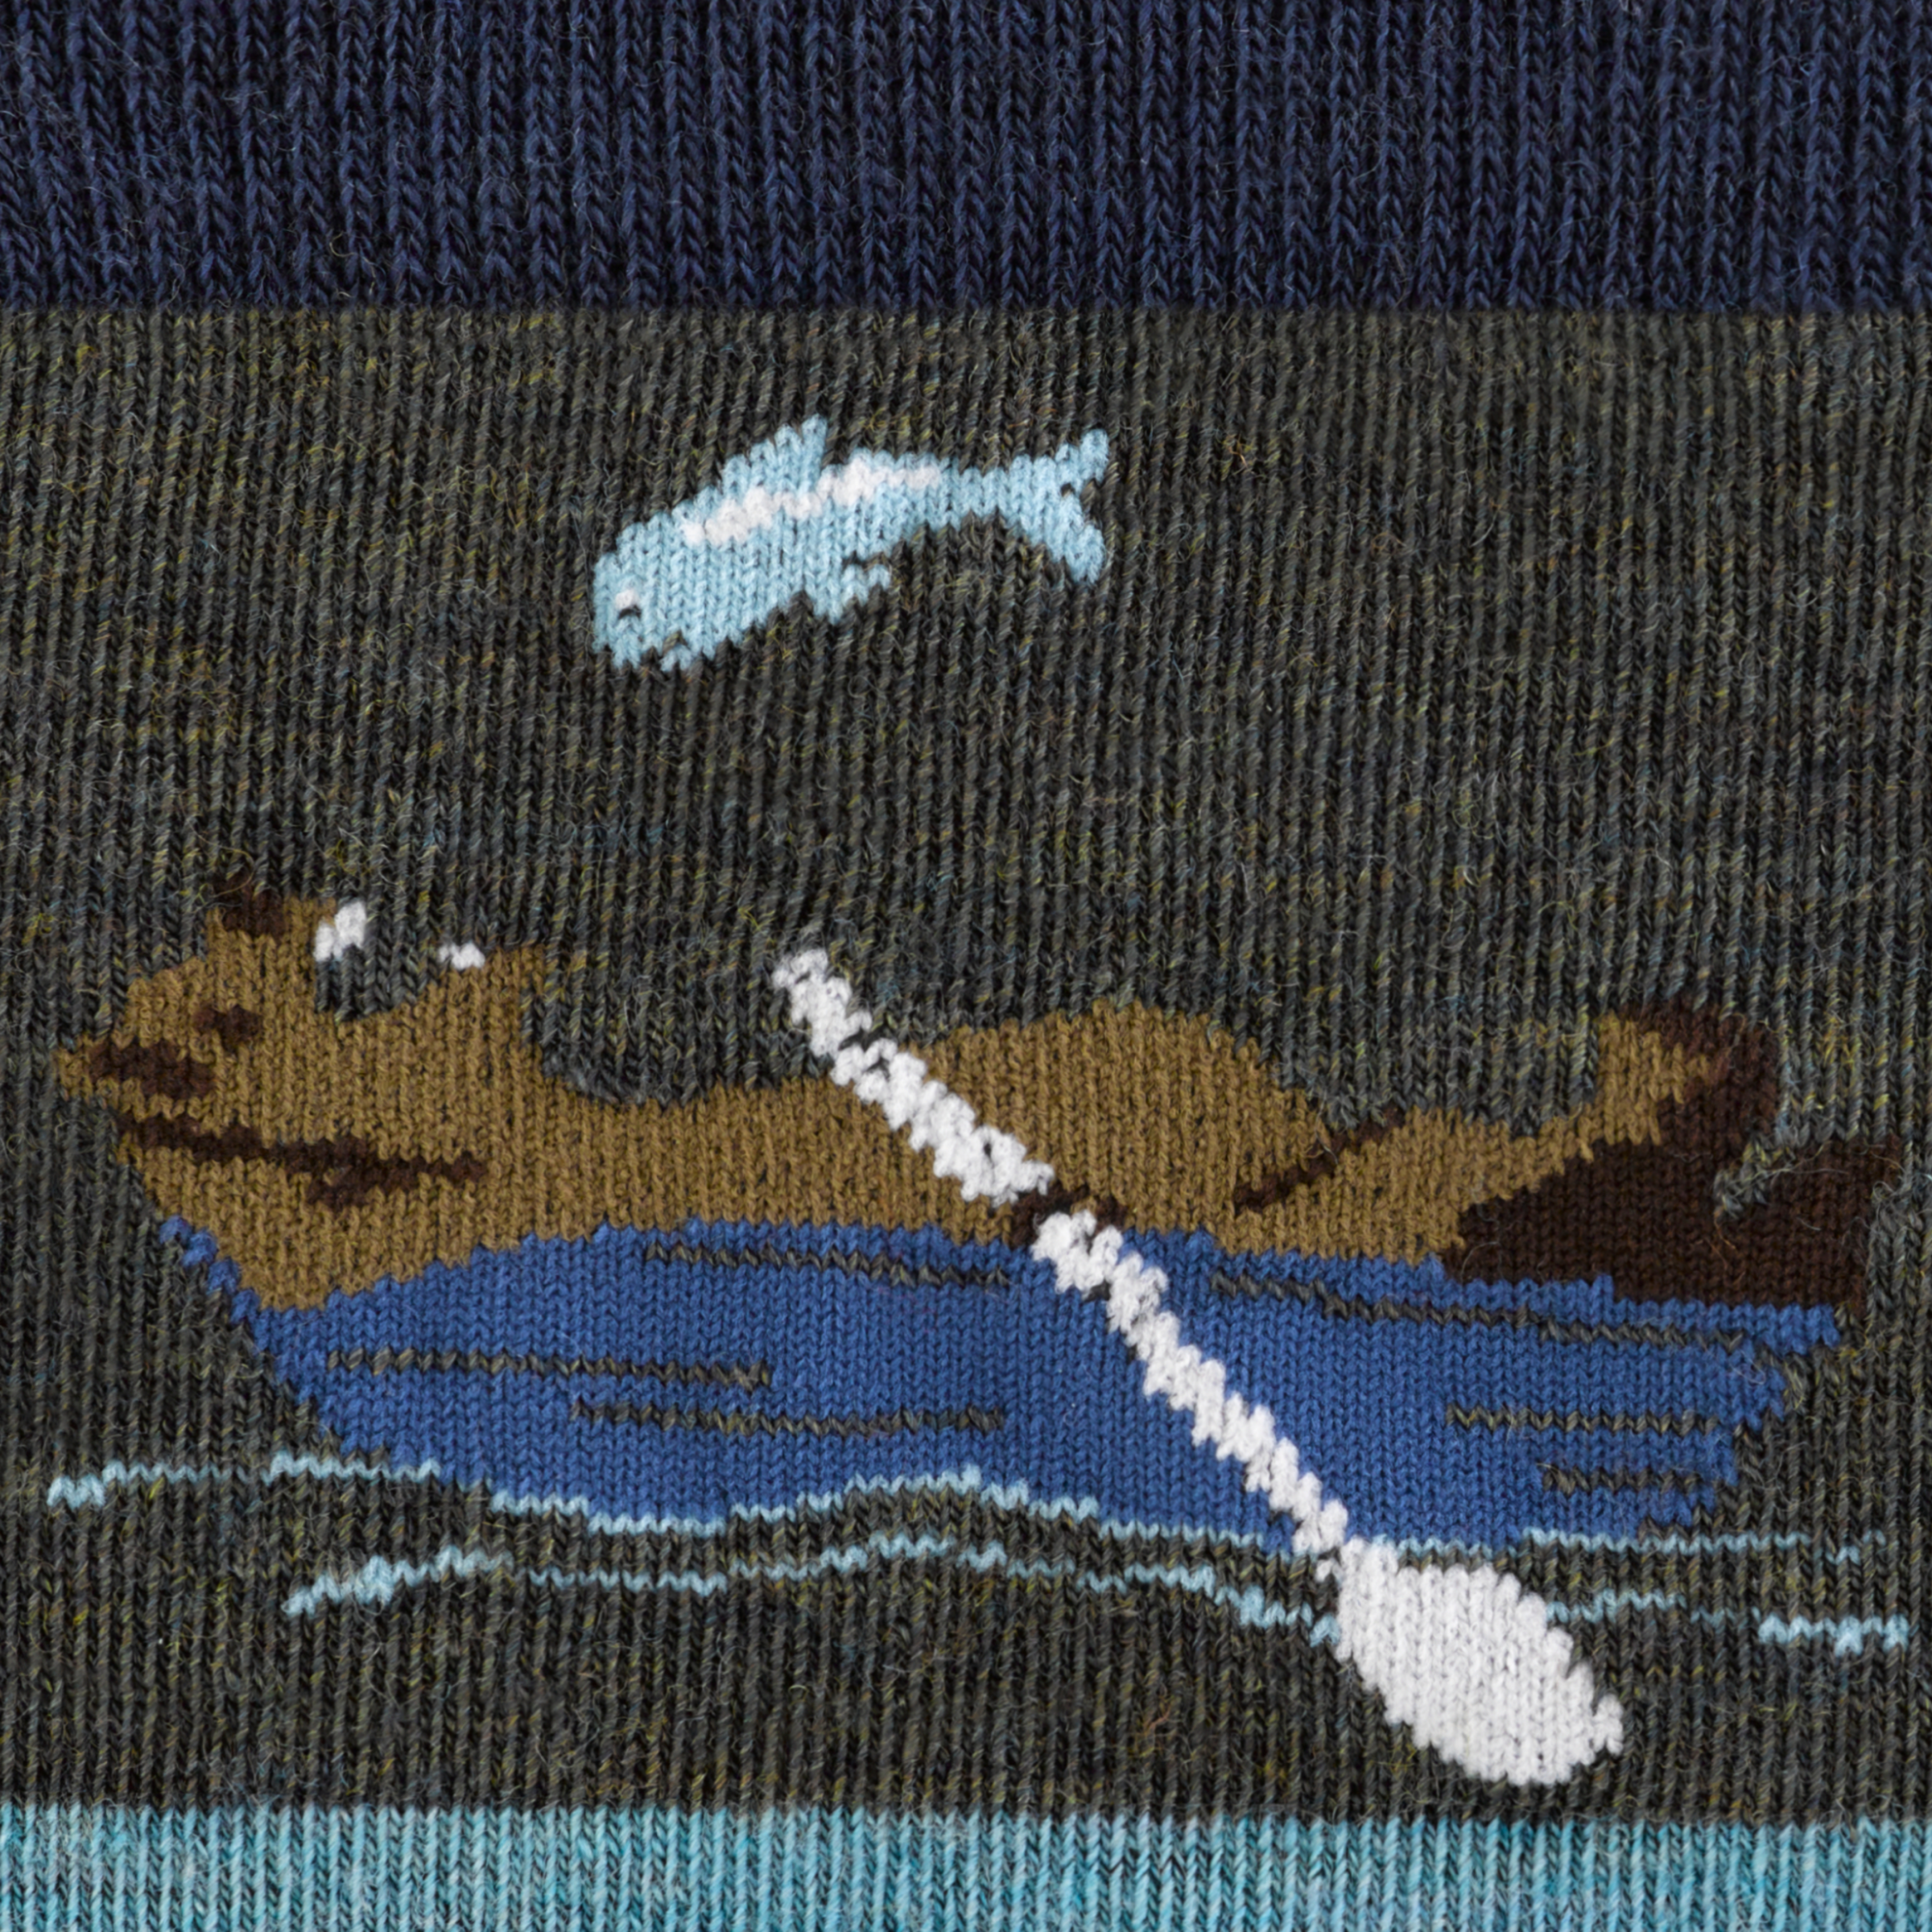 Call out detail image of the of the 6066 forest reverse image of bear laying in boat ready to catch fish